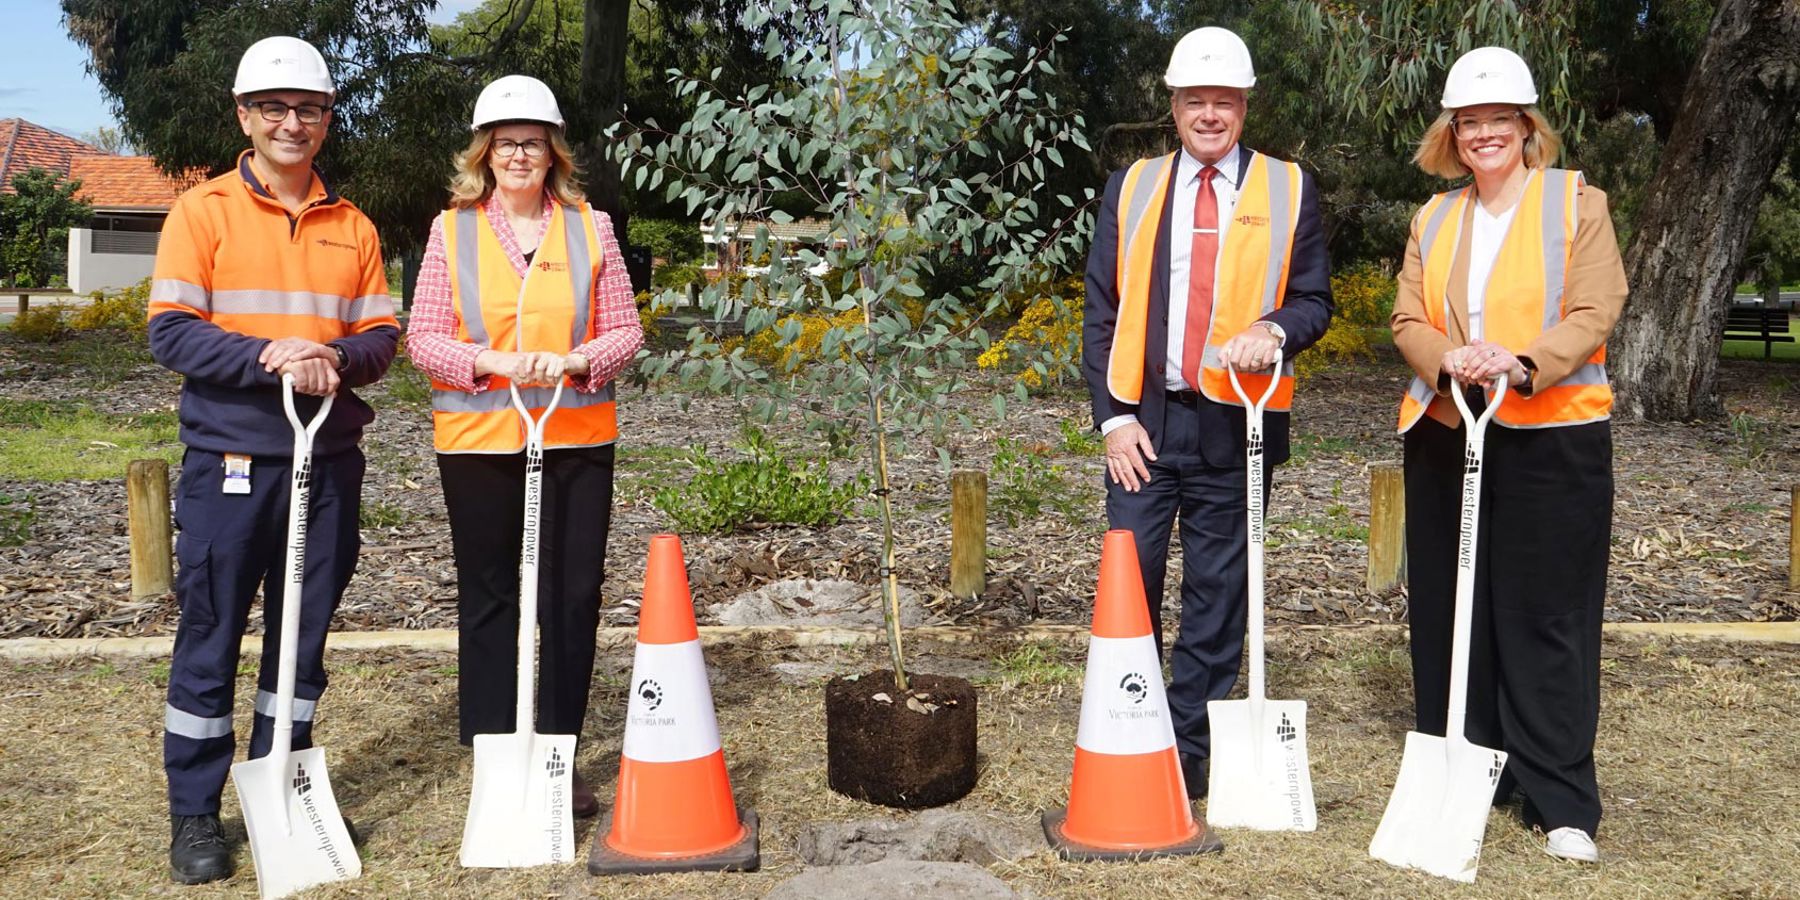 Western Power joins forces with State and Local Governments to deliver the largest underground power project to date in St James, East Victoria Park and Bentley.